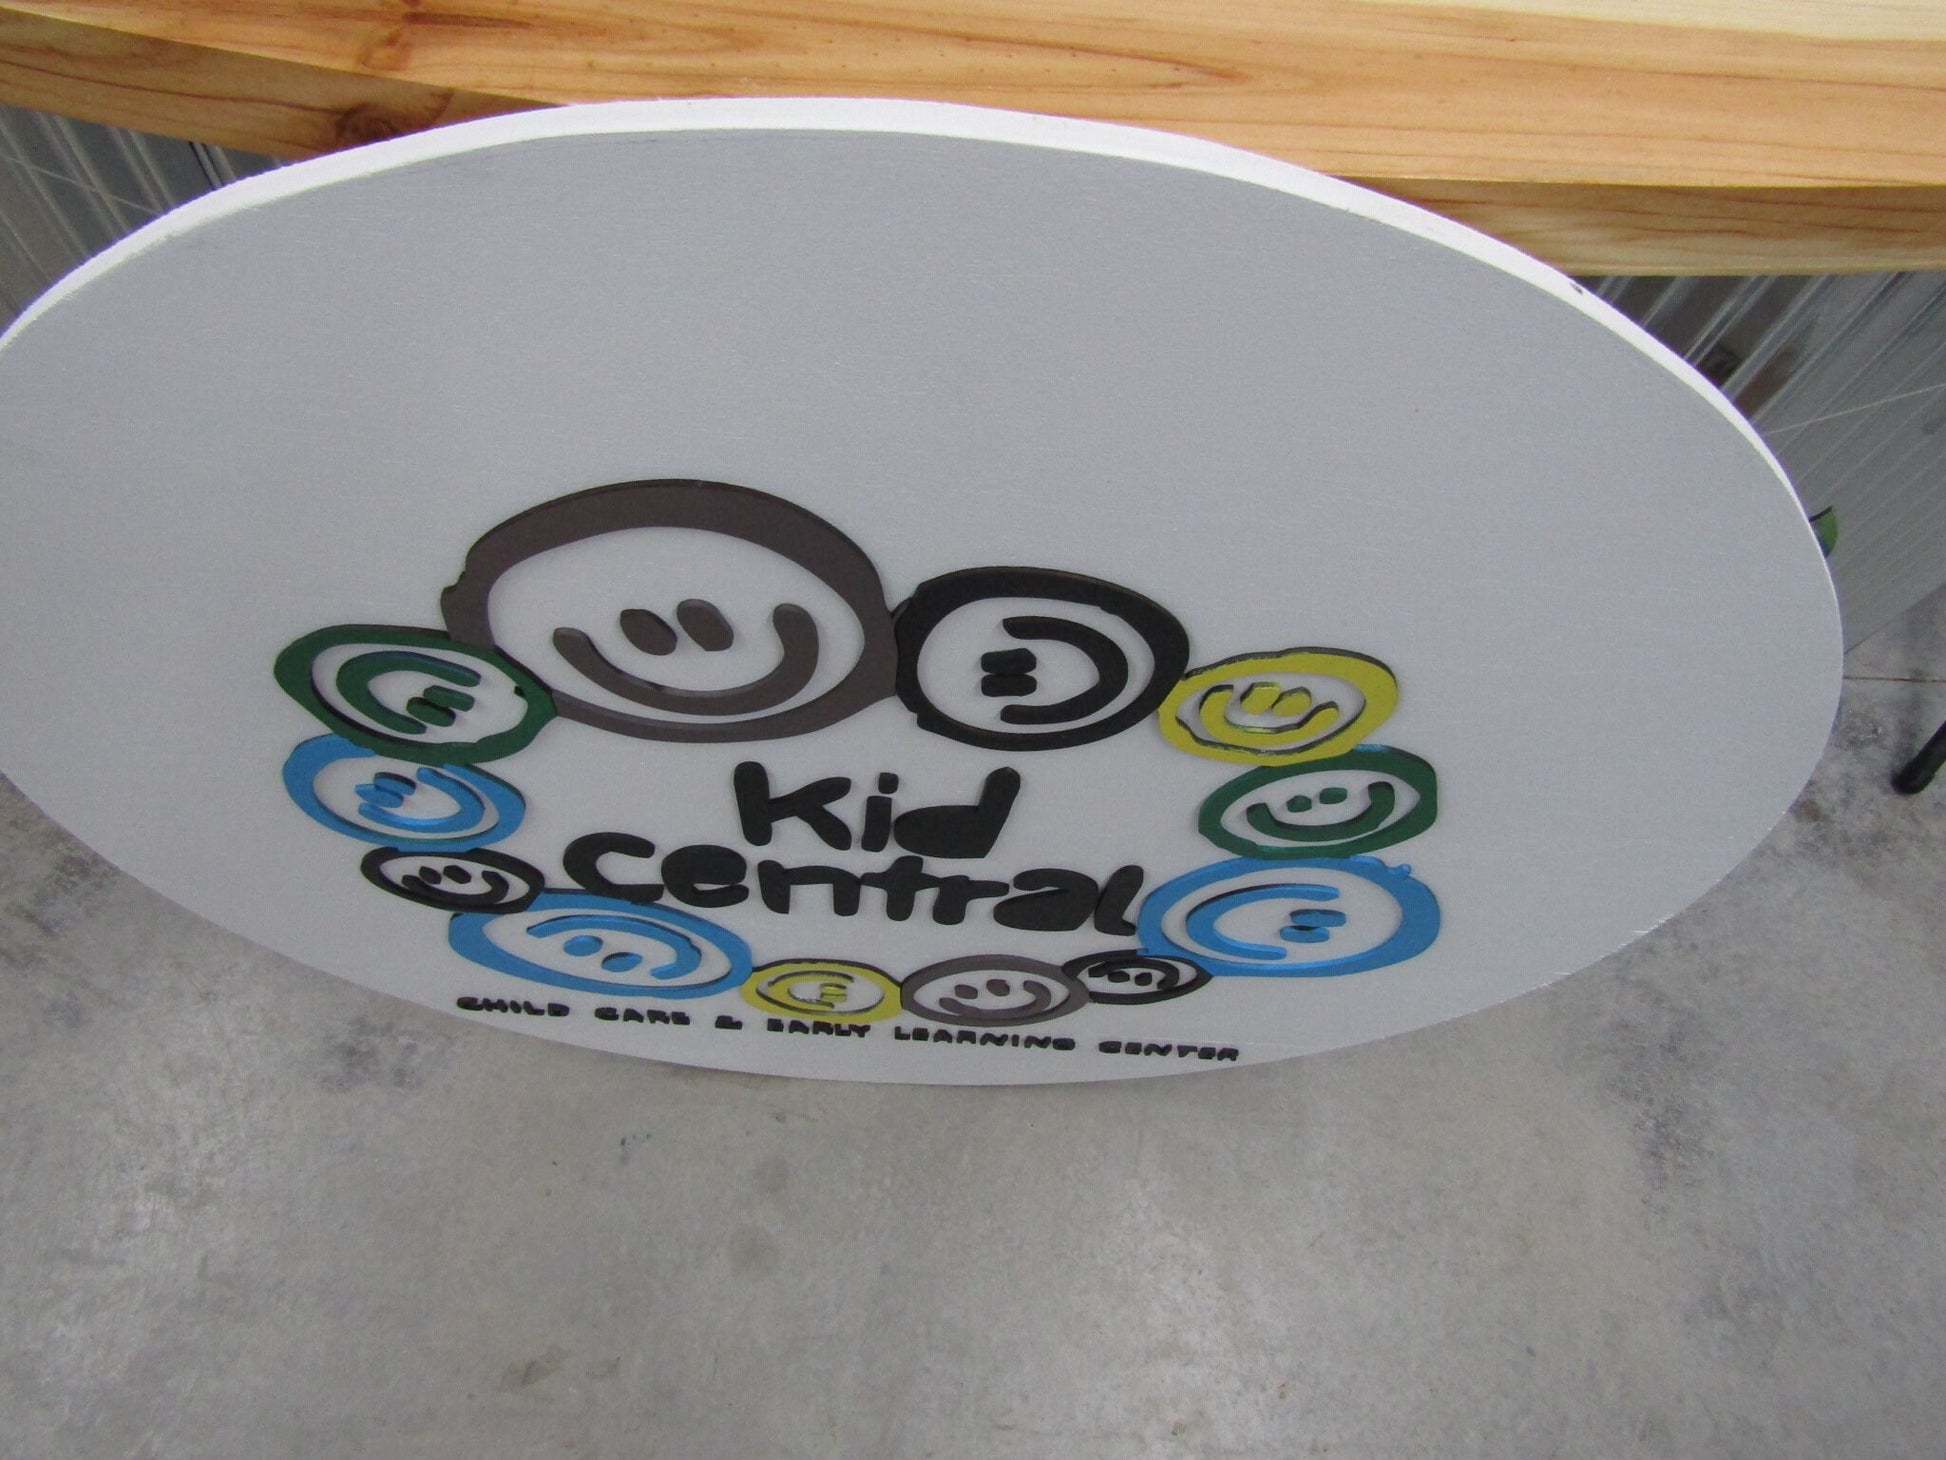 Custom Round Wood Sign Smiley Face Emoji Day Care Center Kid Learning Welcoming Happy Place Your Logo Smile Raised 3D Handmade Sign Learning